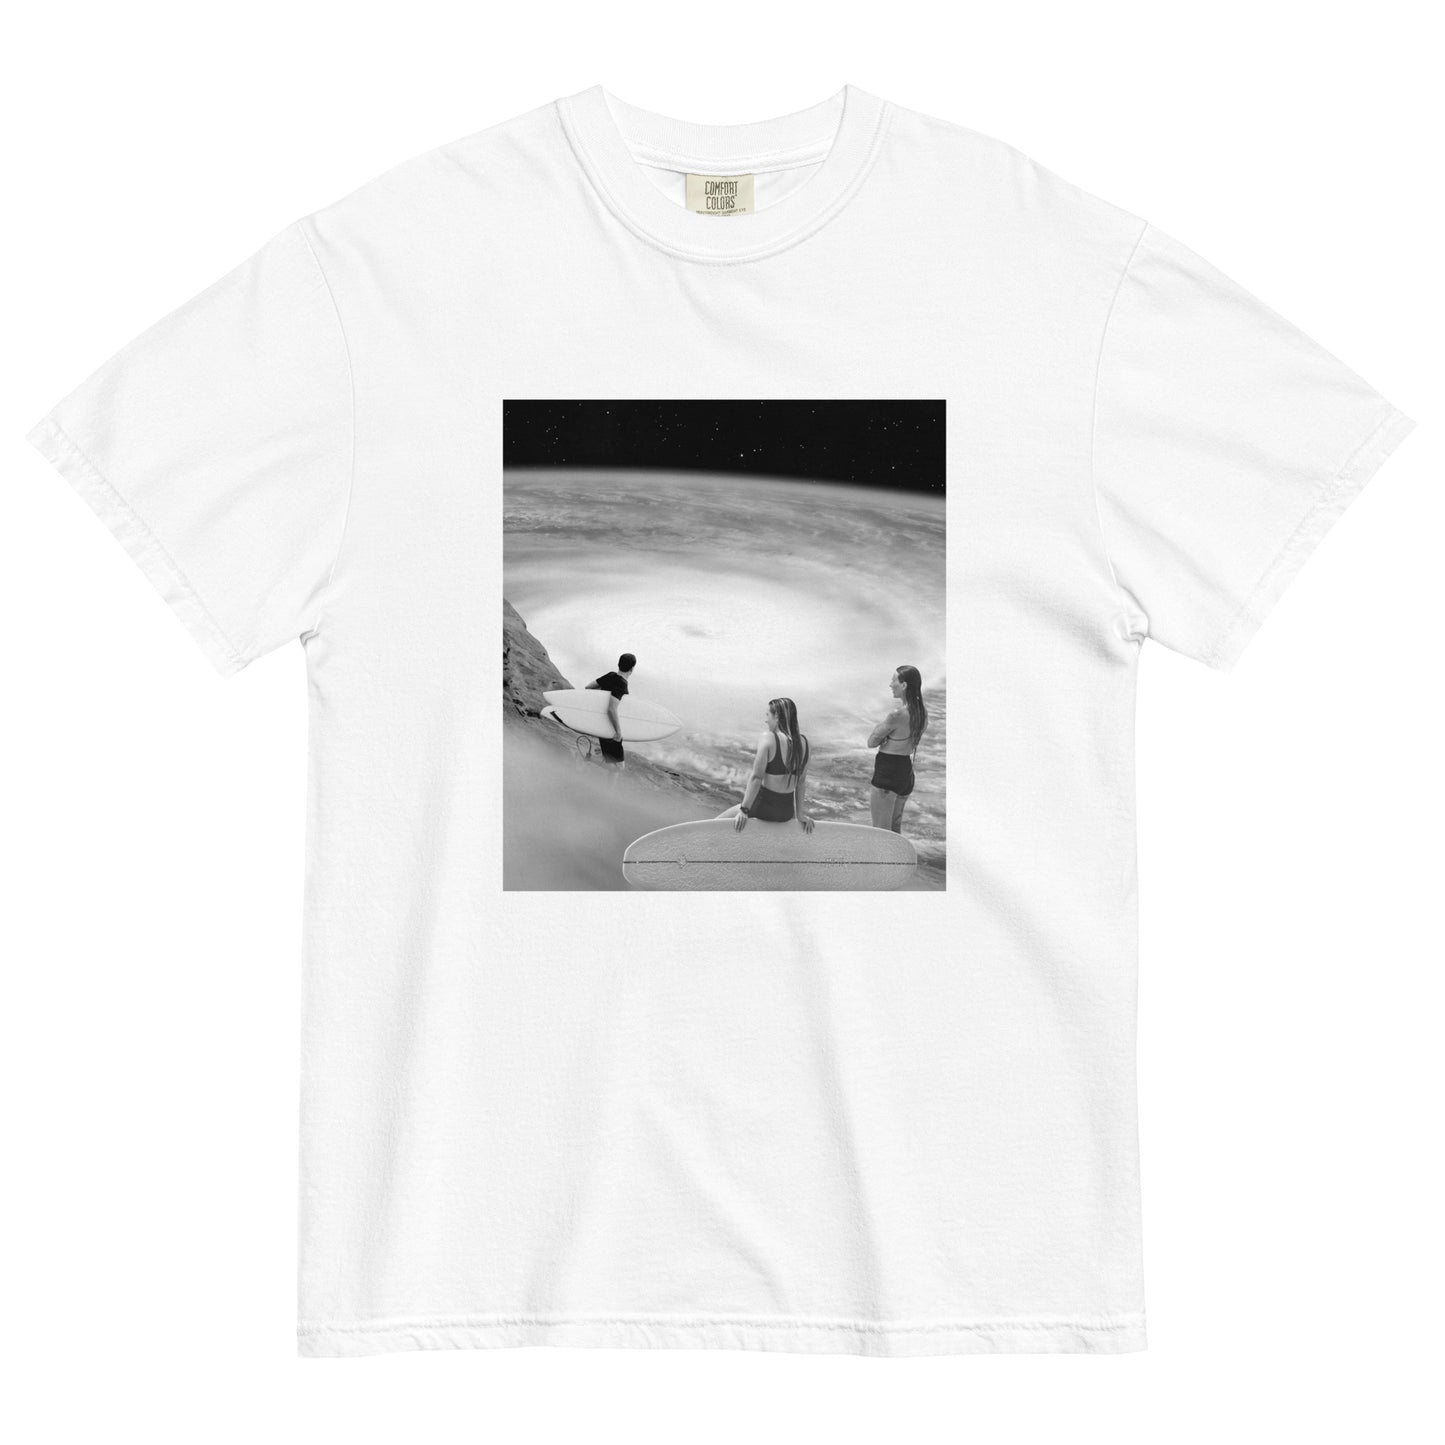 Surf's Up Men's Relaxed Fit Tee